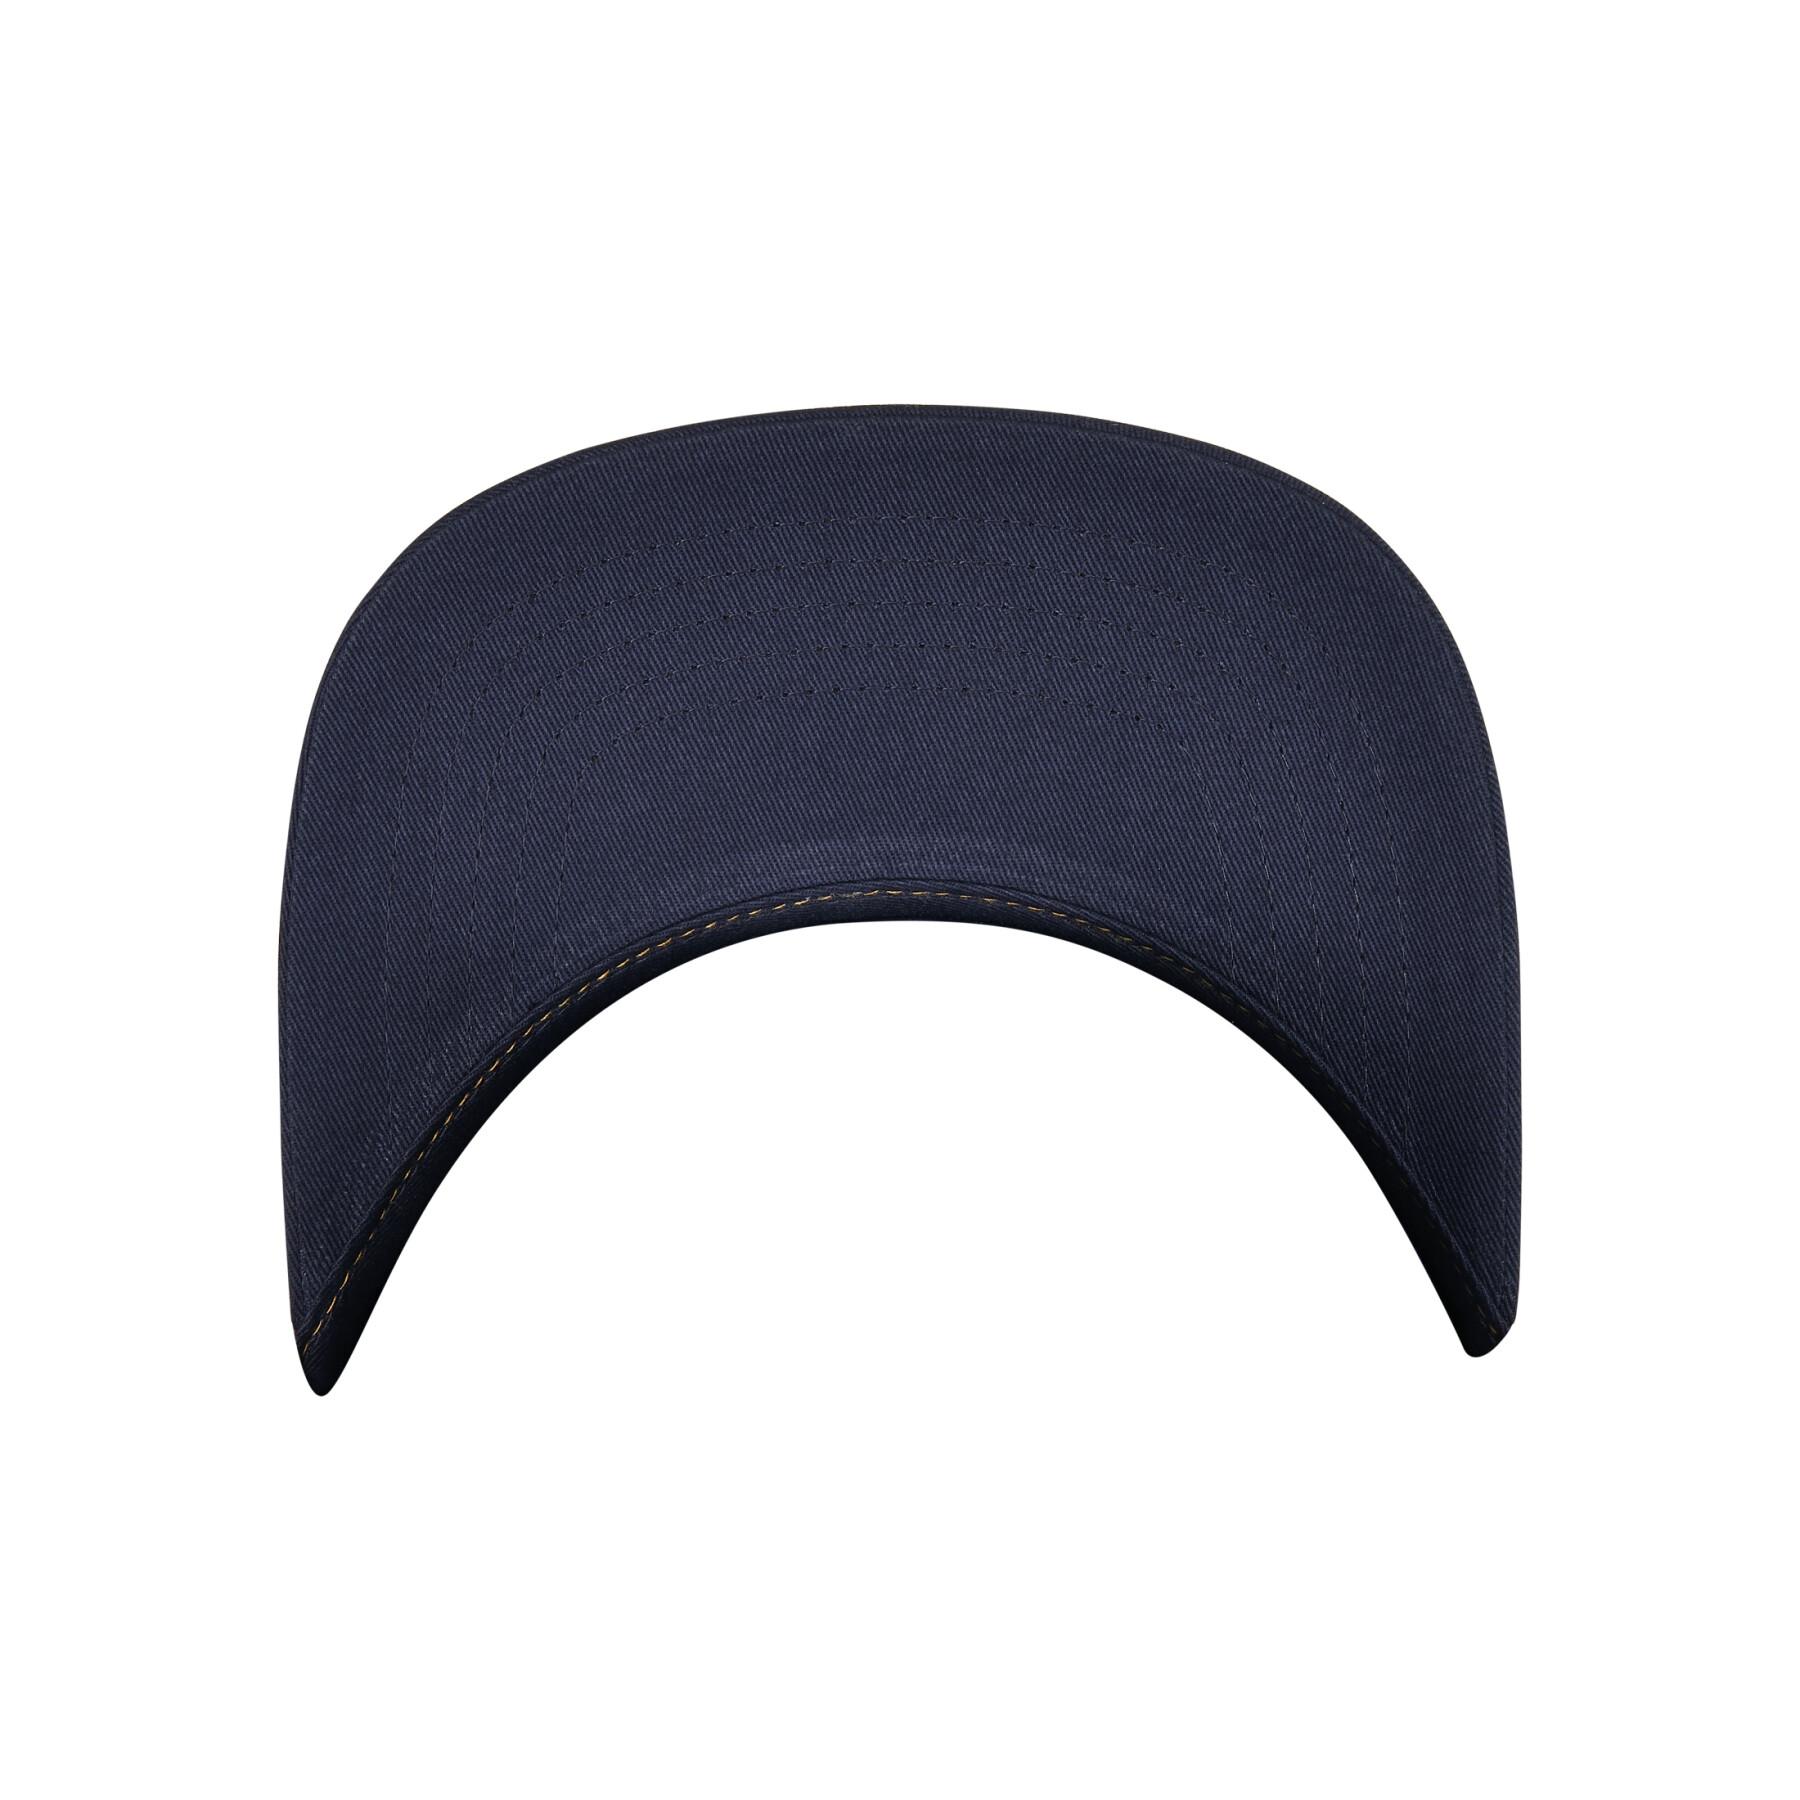 Casquette Cayler & Sons cl holidays strong deconstructed